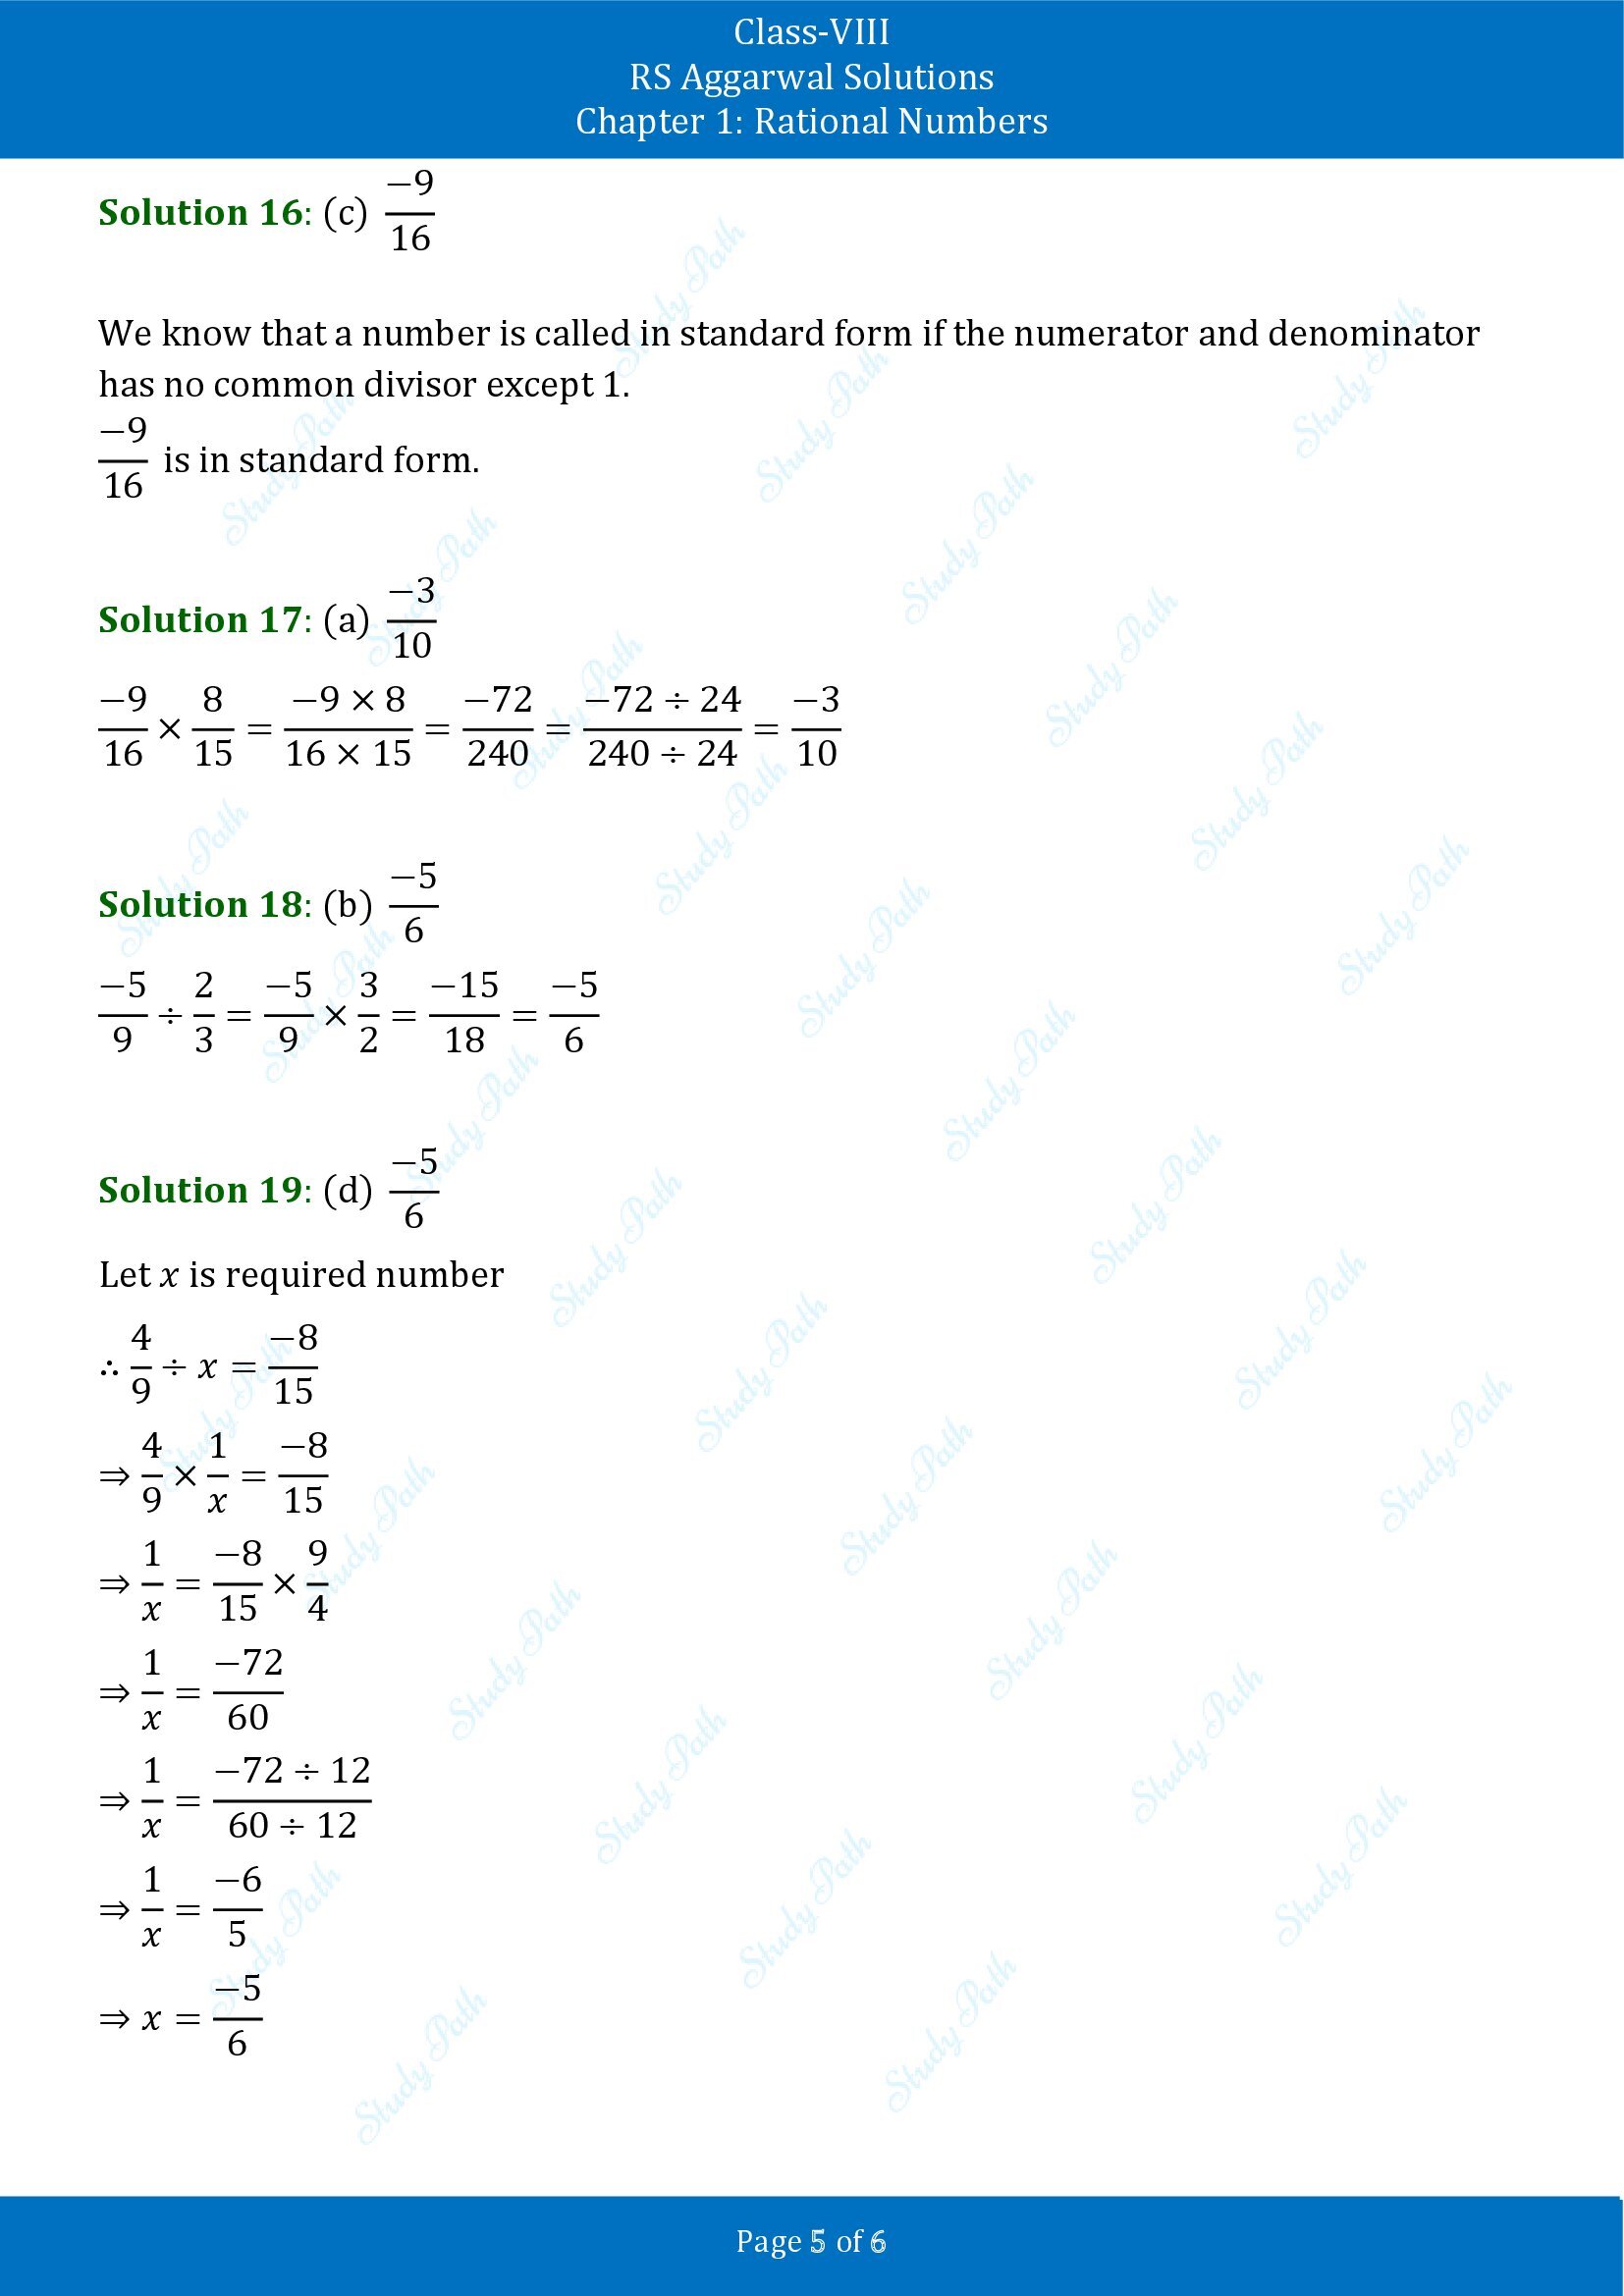 RS Aggarwal Solutions Class 8 Chapter 1 Rational Numbers Exercise 1H MCQs 00005